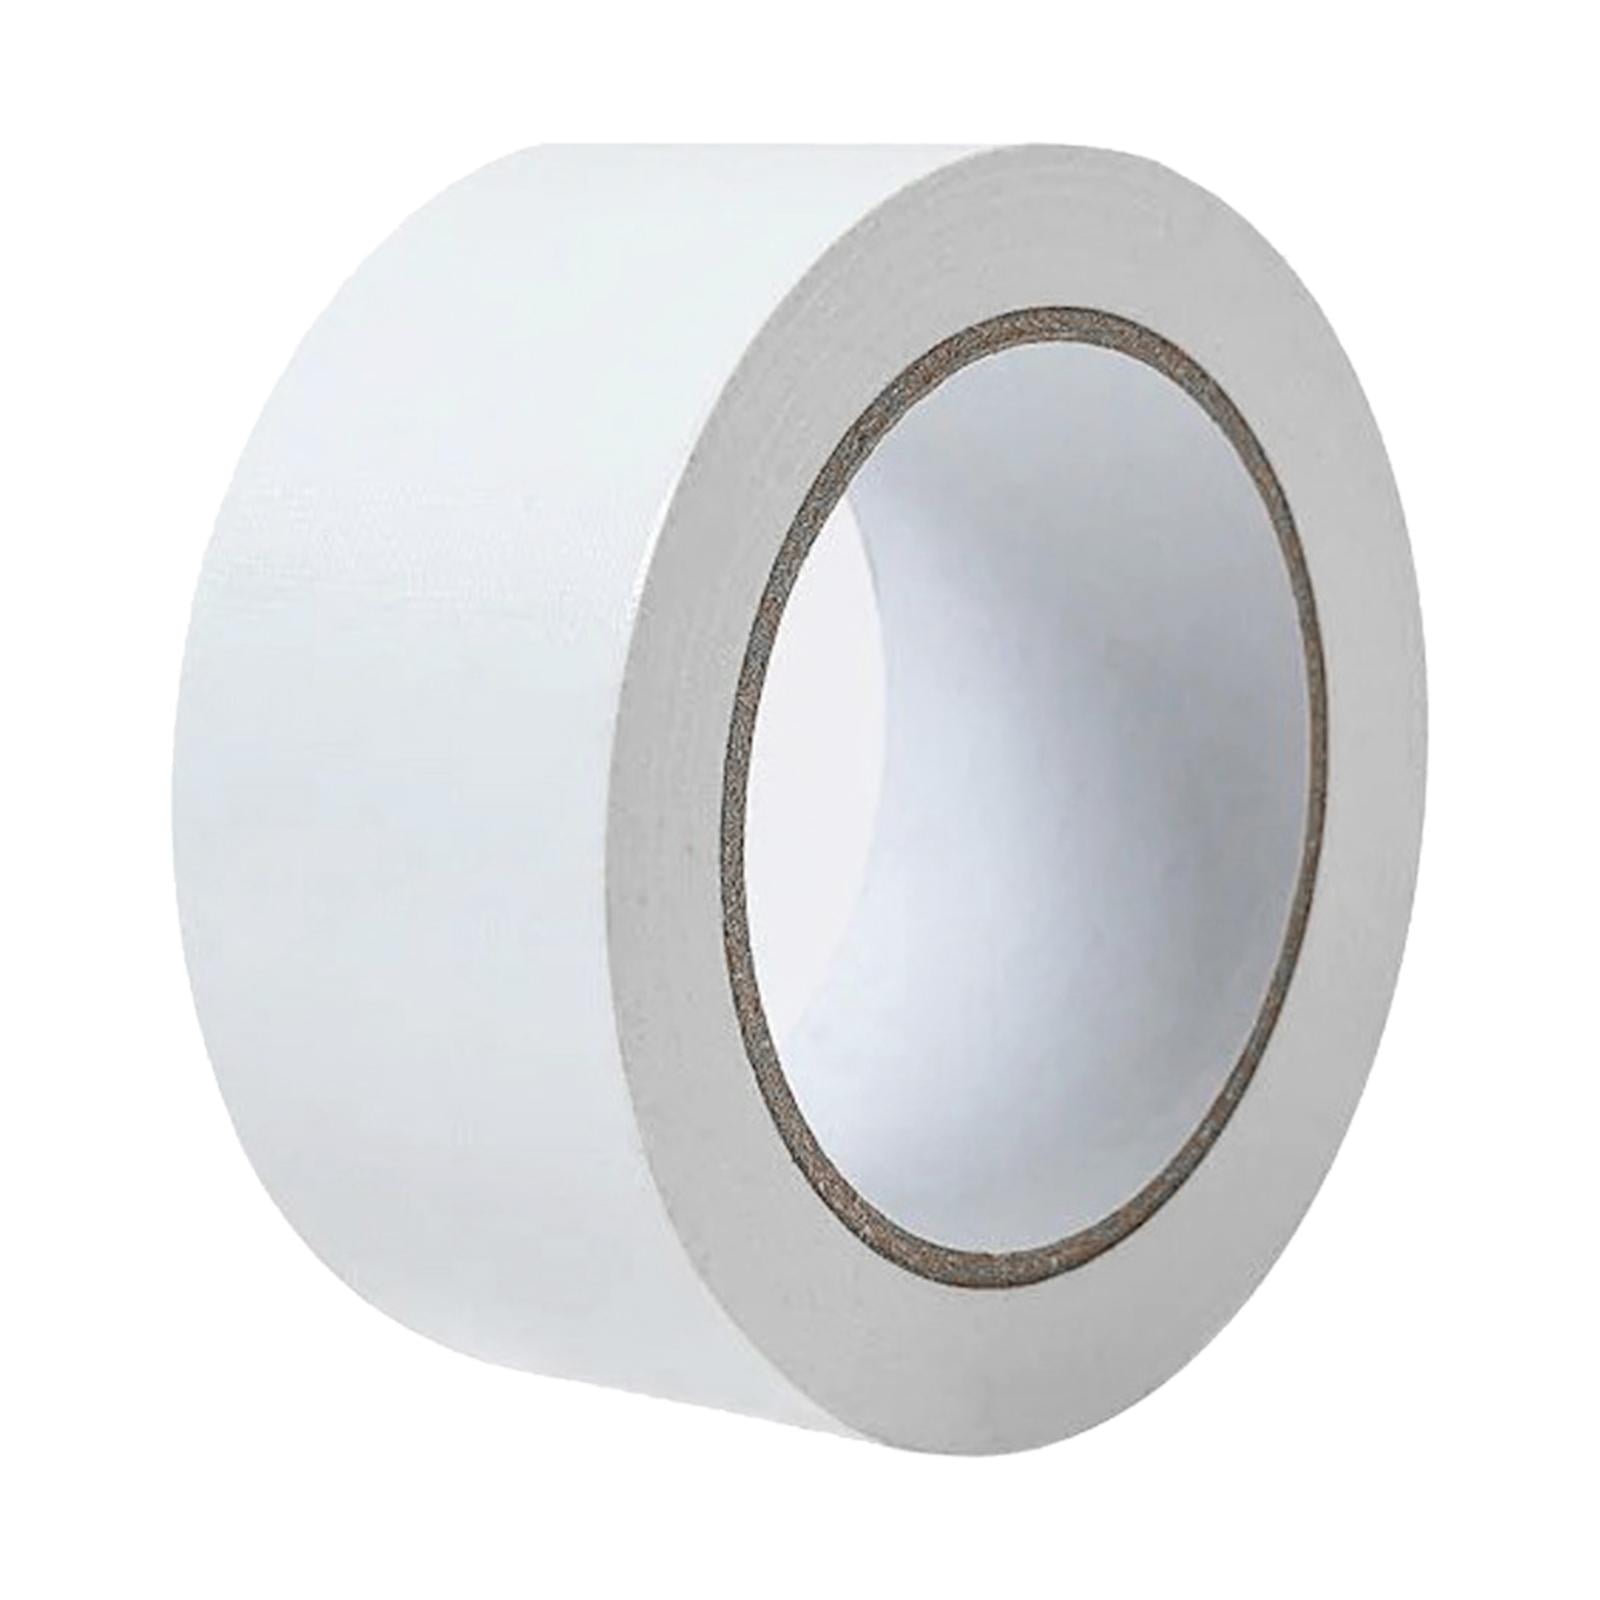 Powerful Gridding Double-Sided Tape Super Strong Two Sided Adhesive Tape  for Home Industrial Office Walls 20MM*20M 